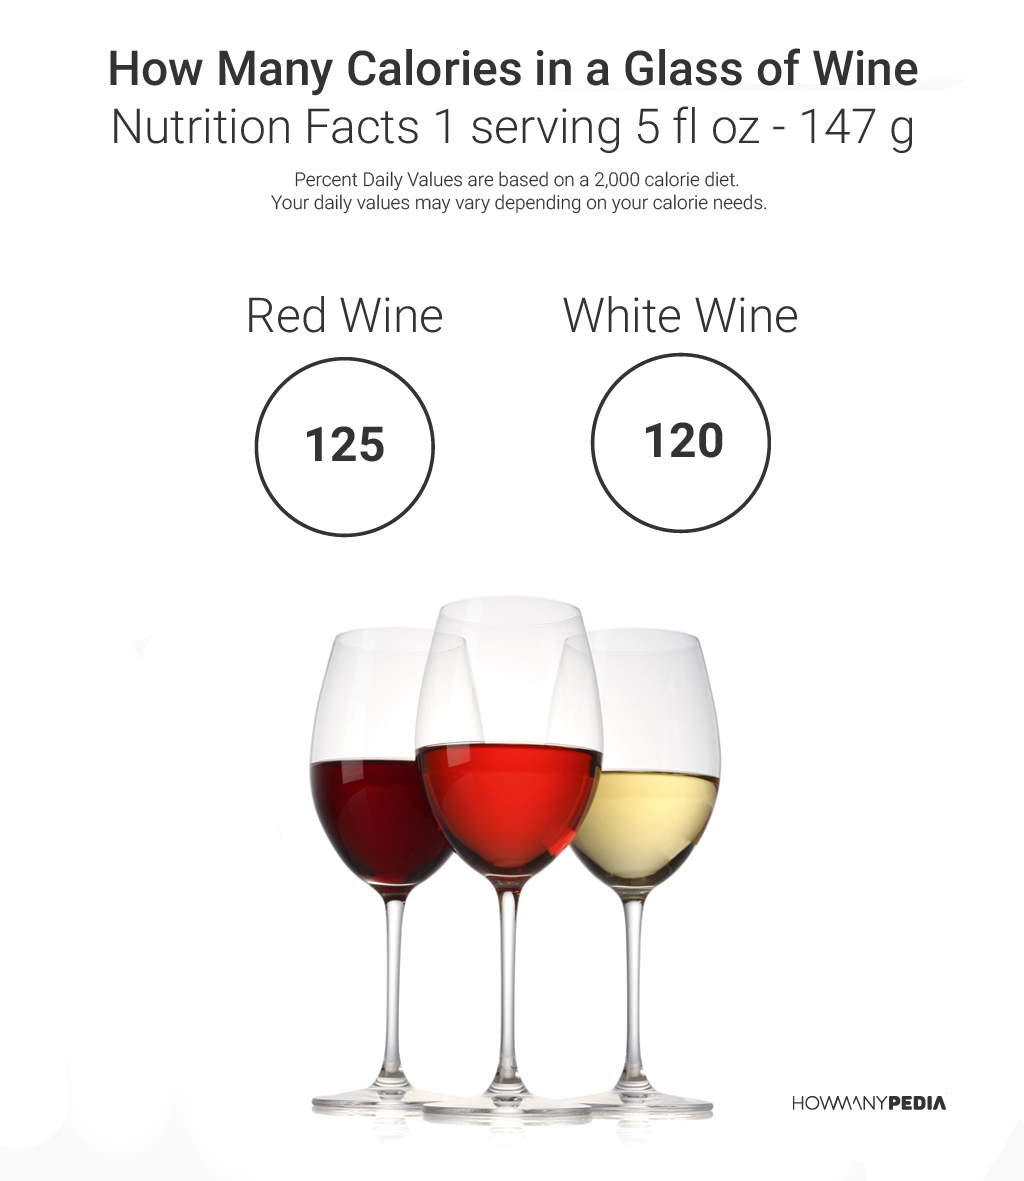 How Many Calories in a Glass of Wine